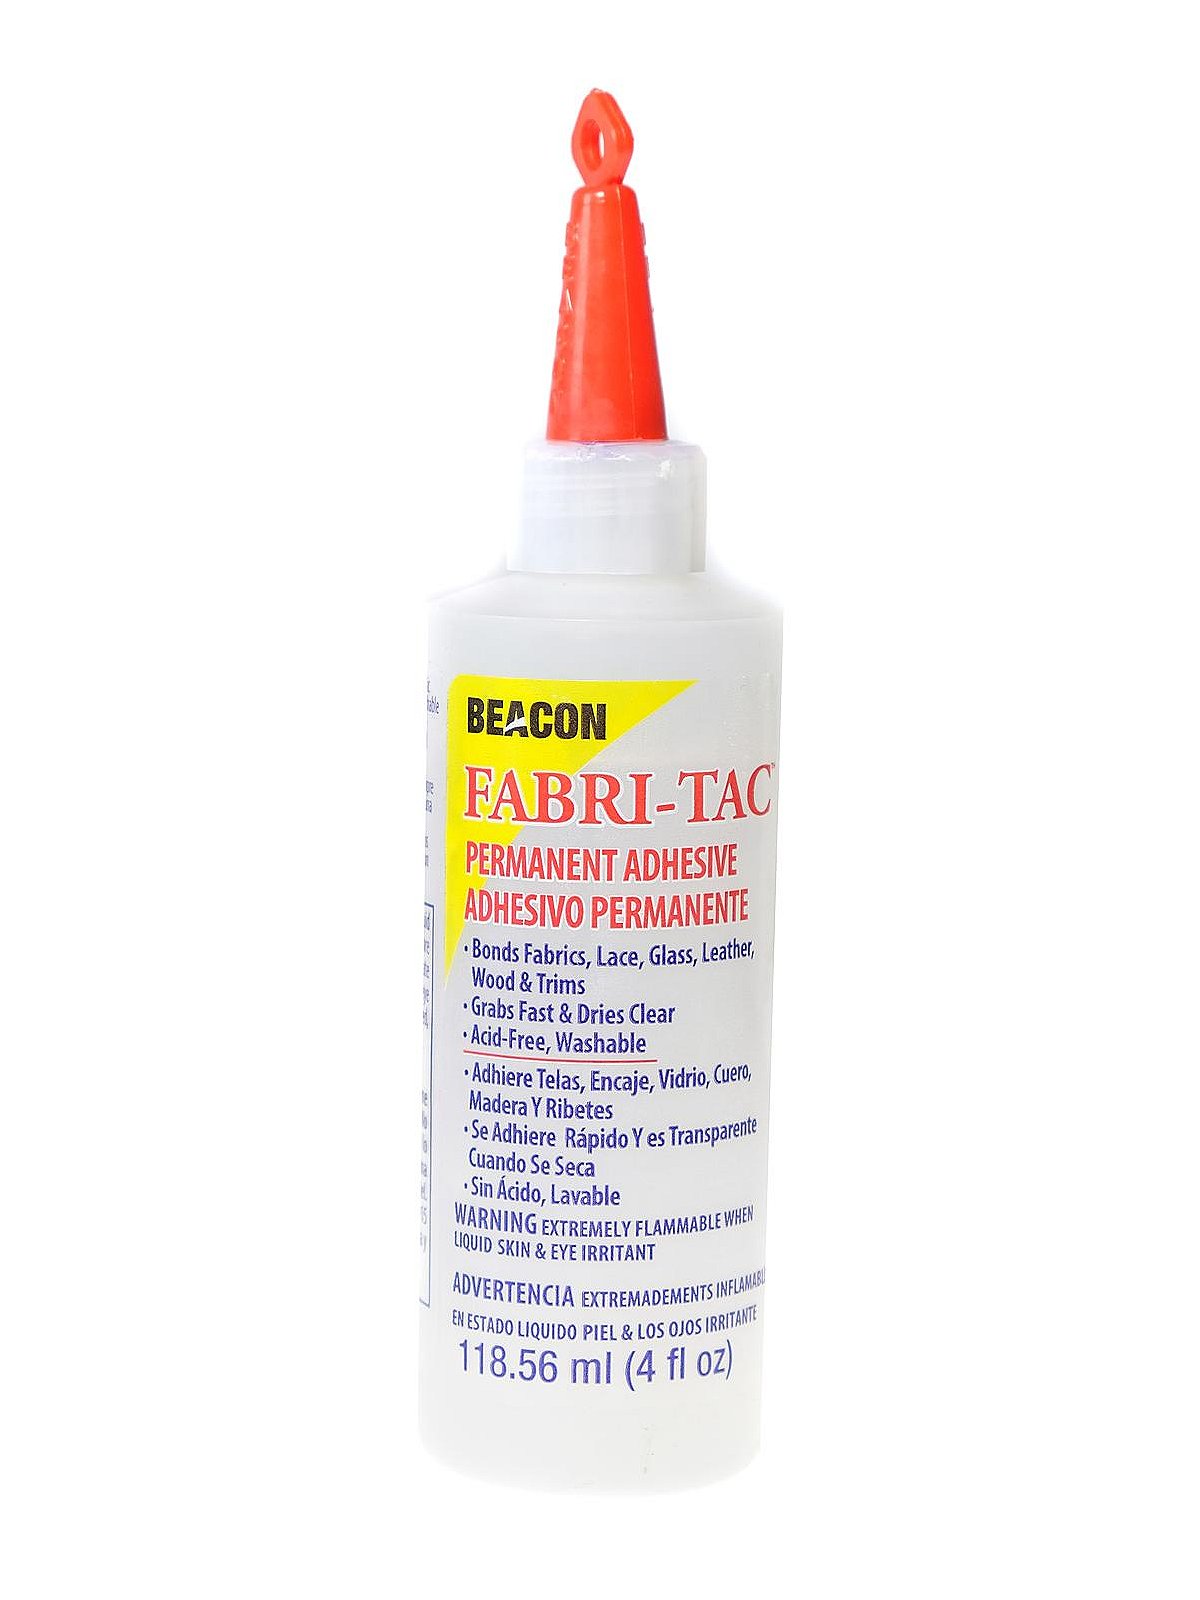 Three-Pack of Beacon Fabri-Tac Permanent Adhesive, 4 Ounce